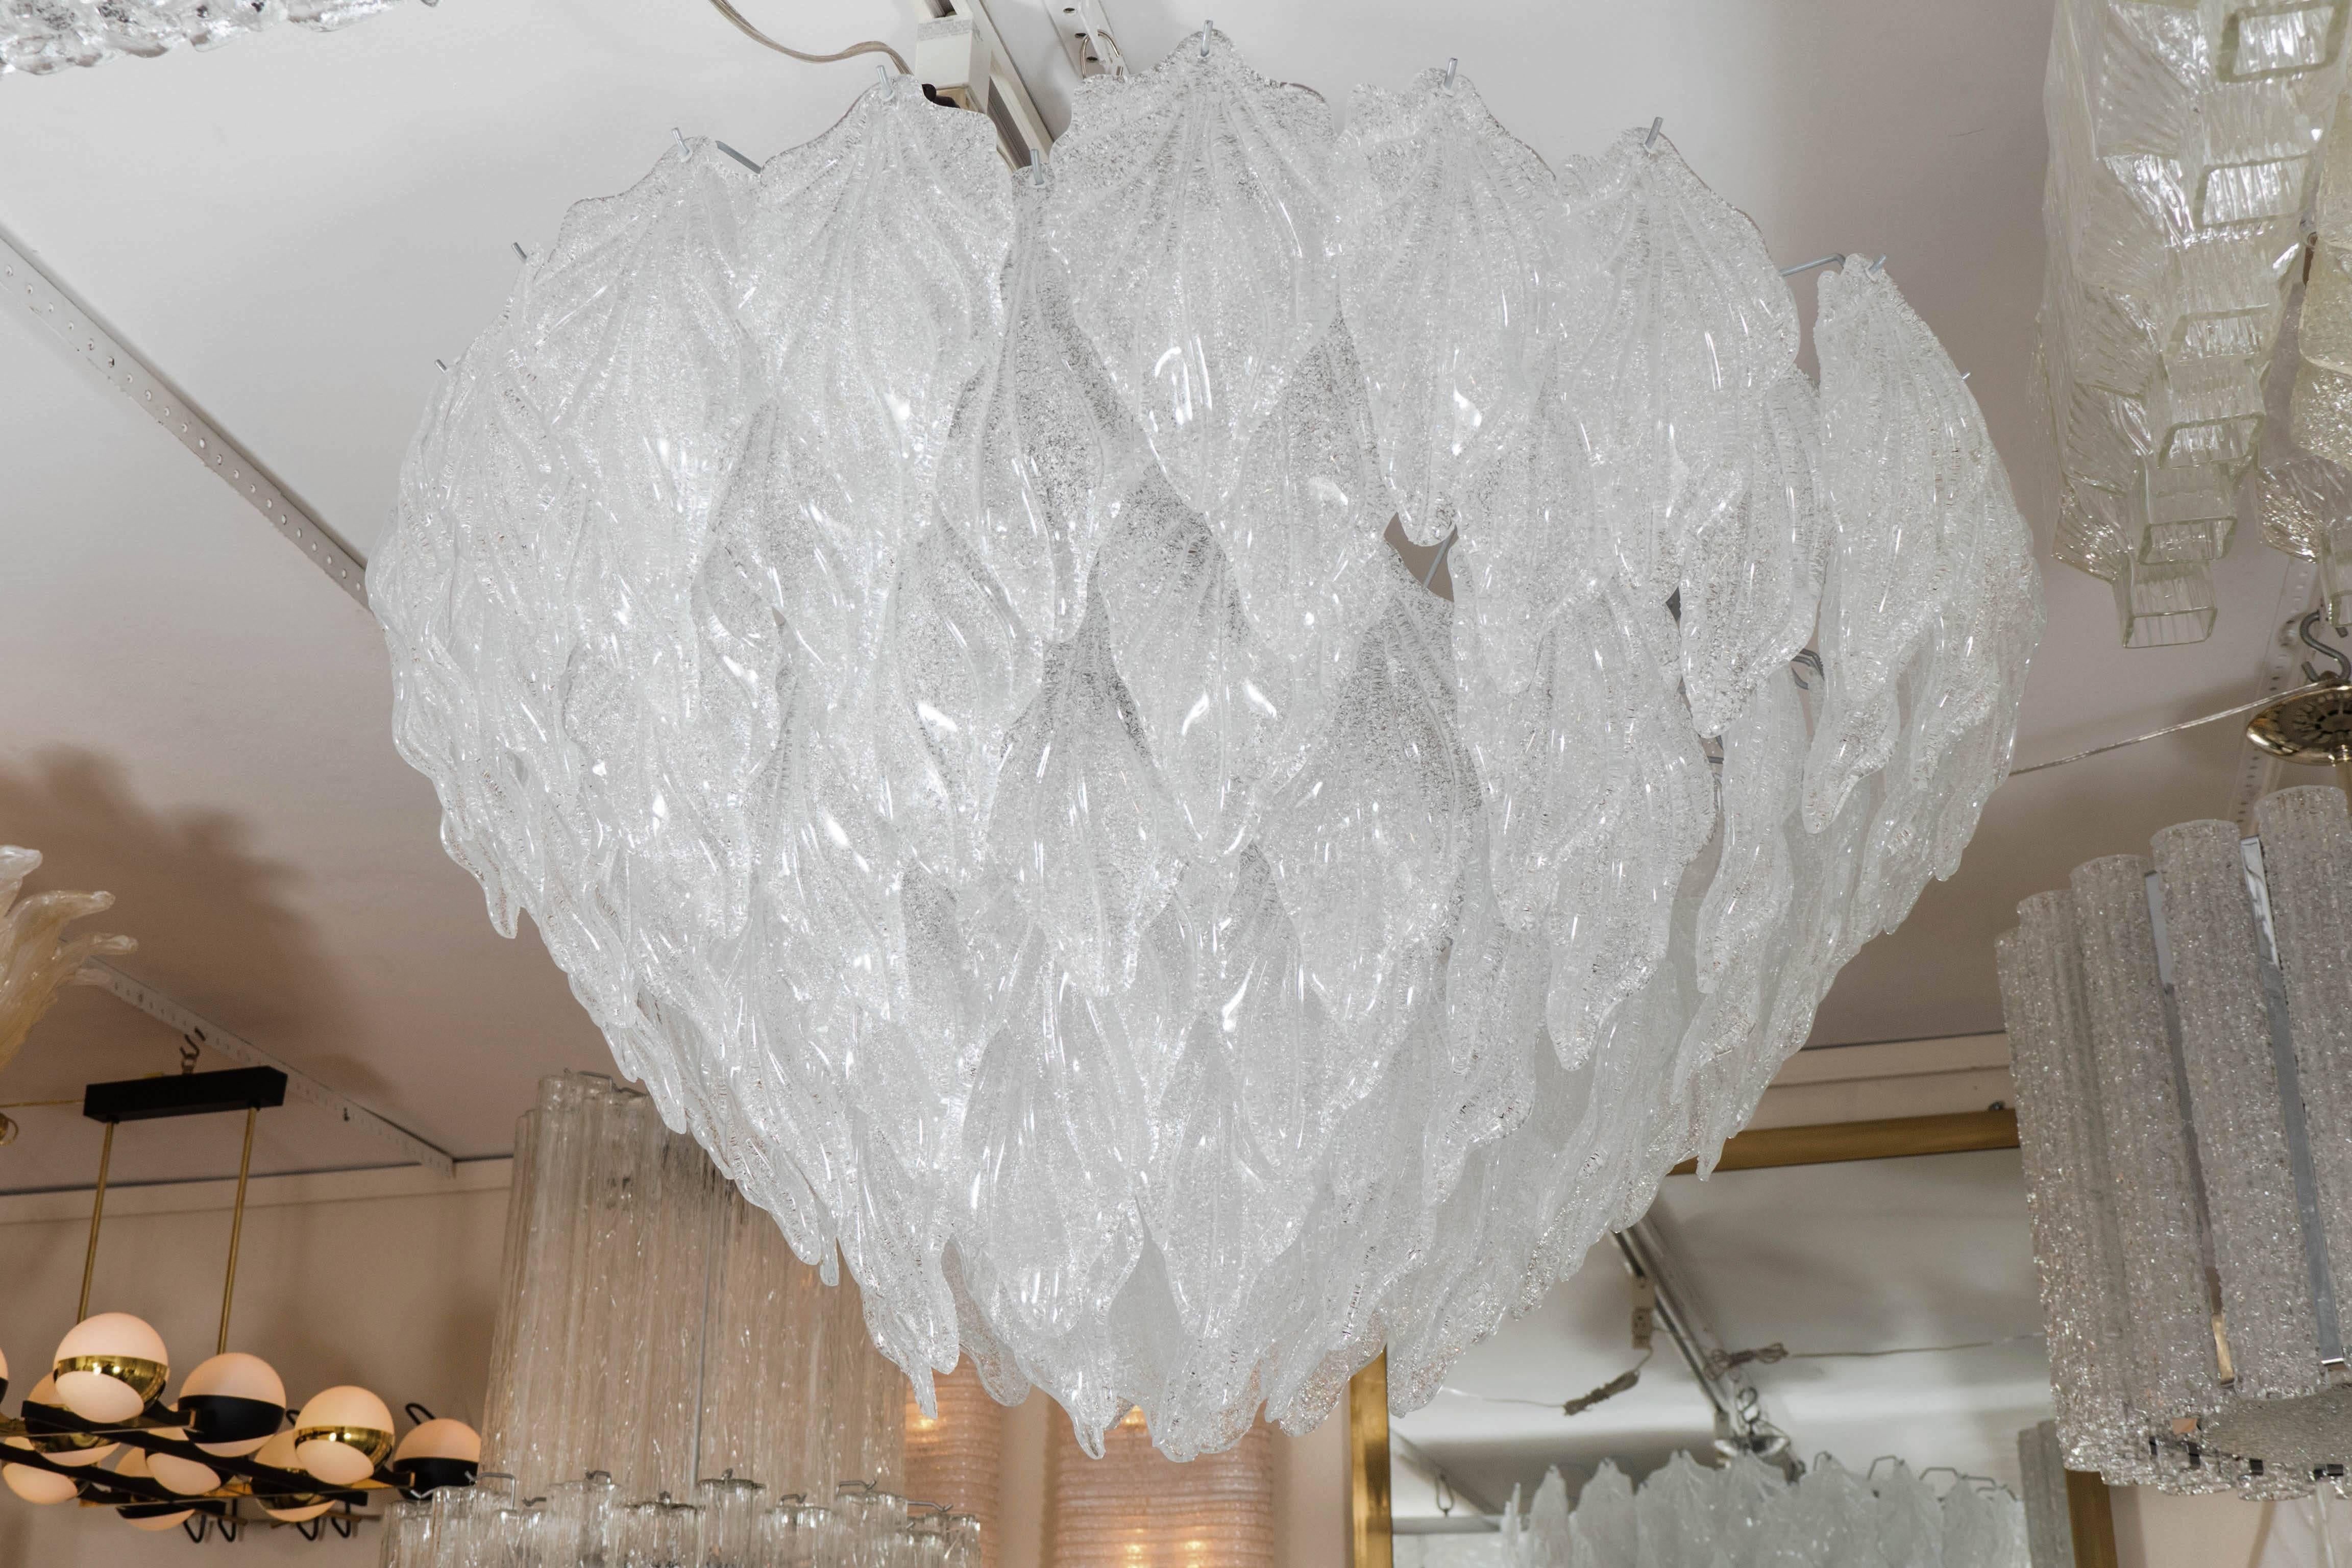 Mid-Century Modern Multitiered Chandelier Composed of Textured Glass Elements